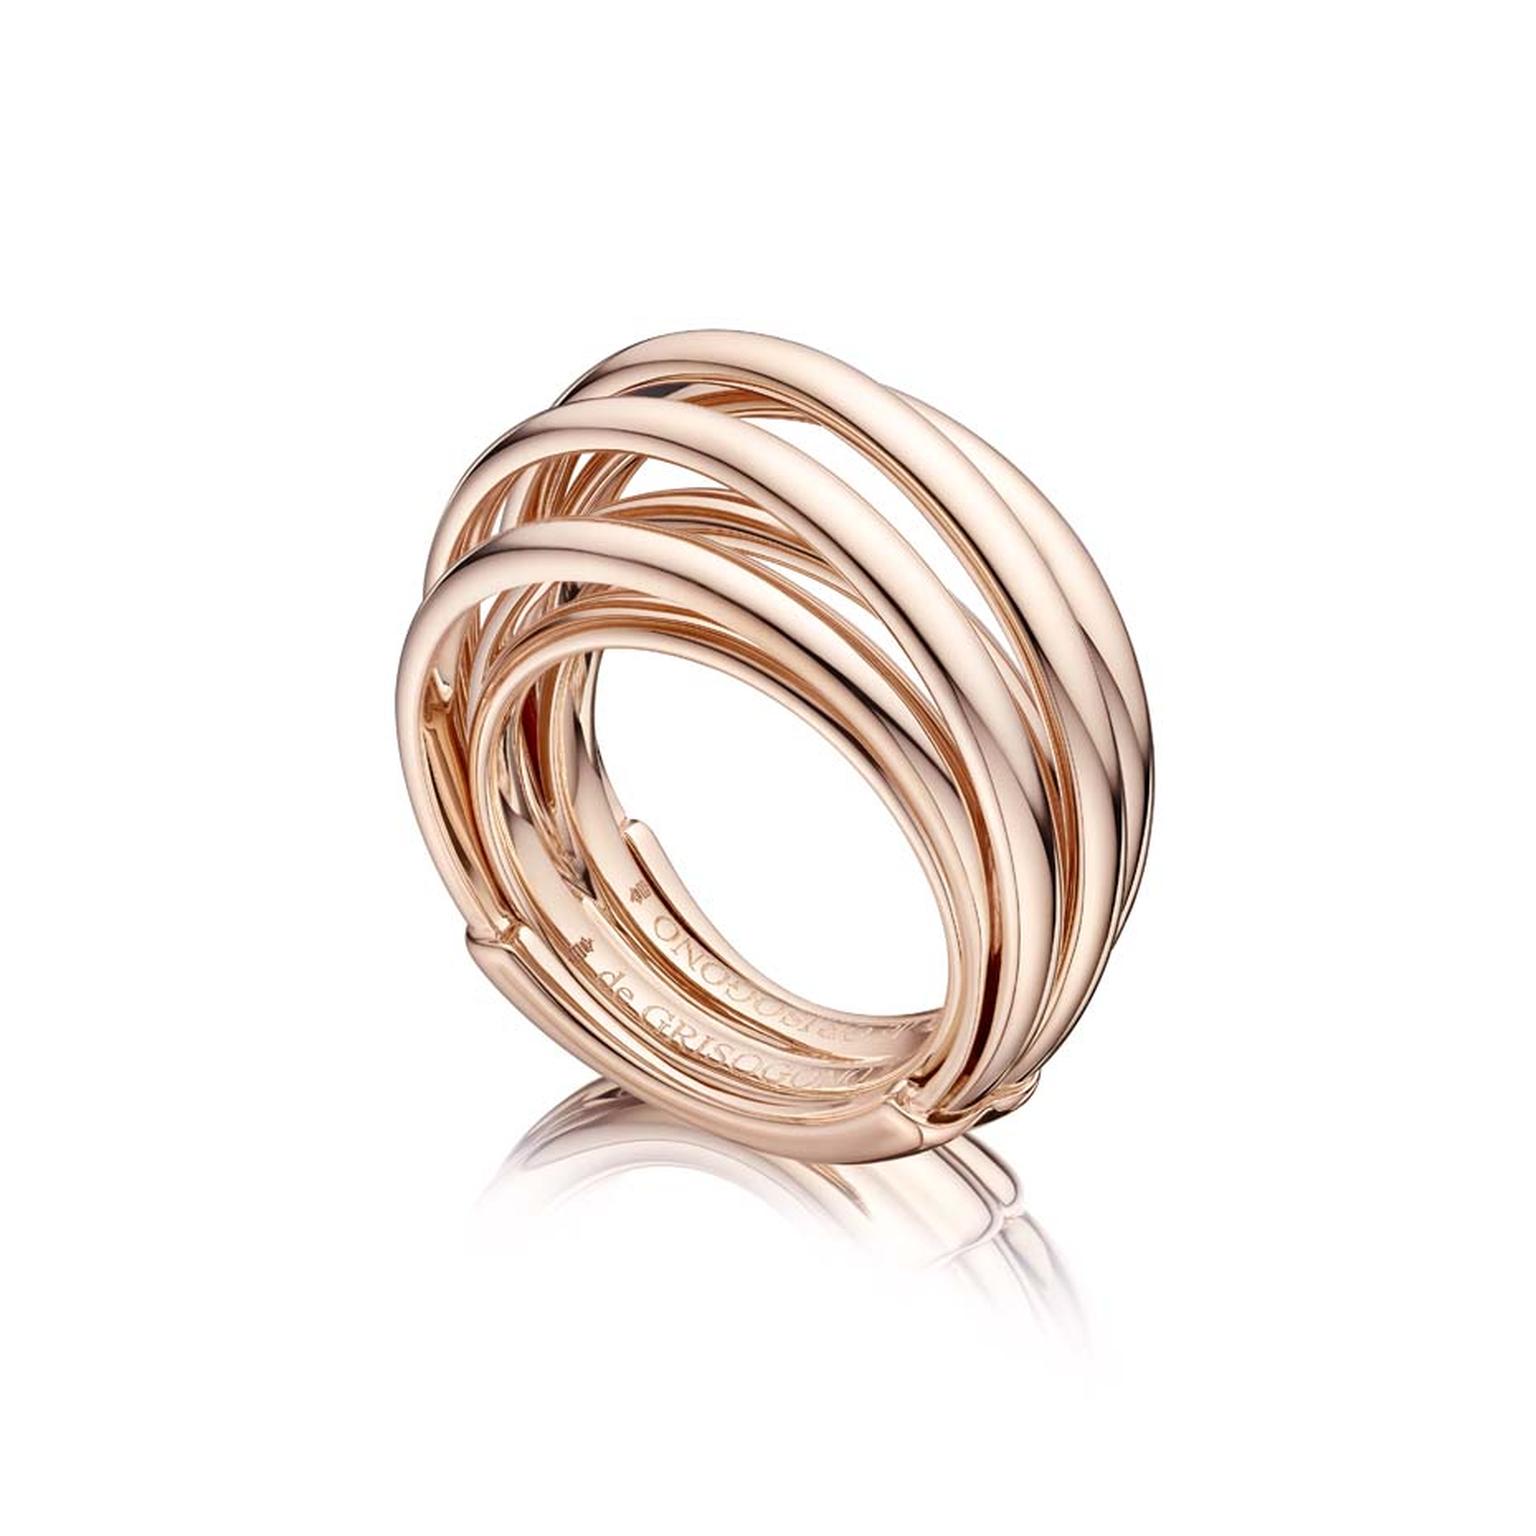 Rose gold de GRISOGONO ring with seven interlocking rings. It takes its cue from the number 7, which is said to embody good luck.